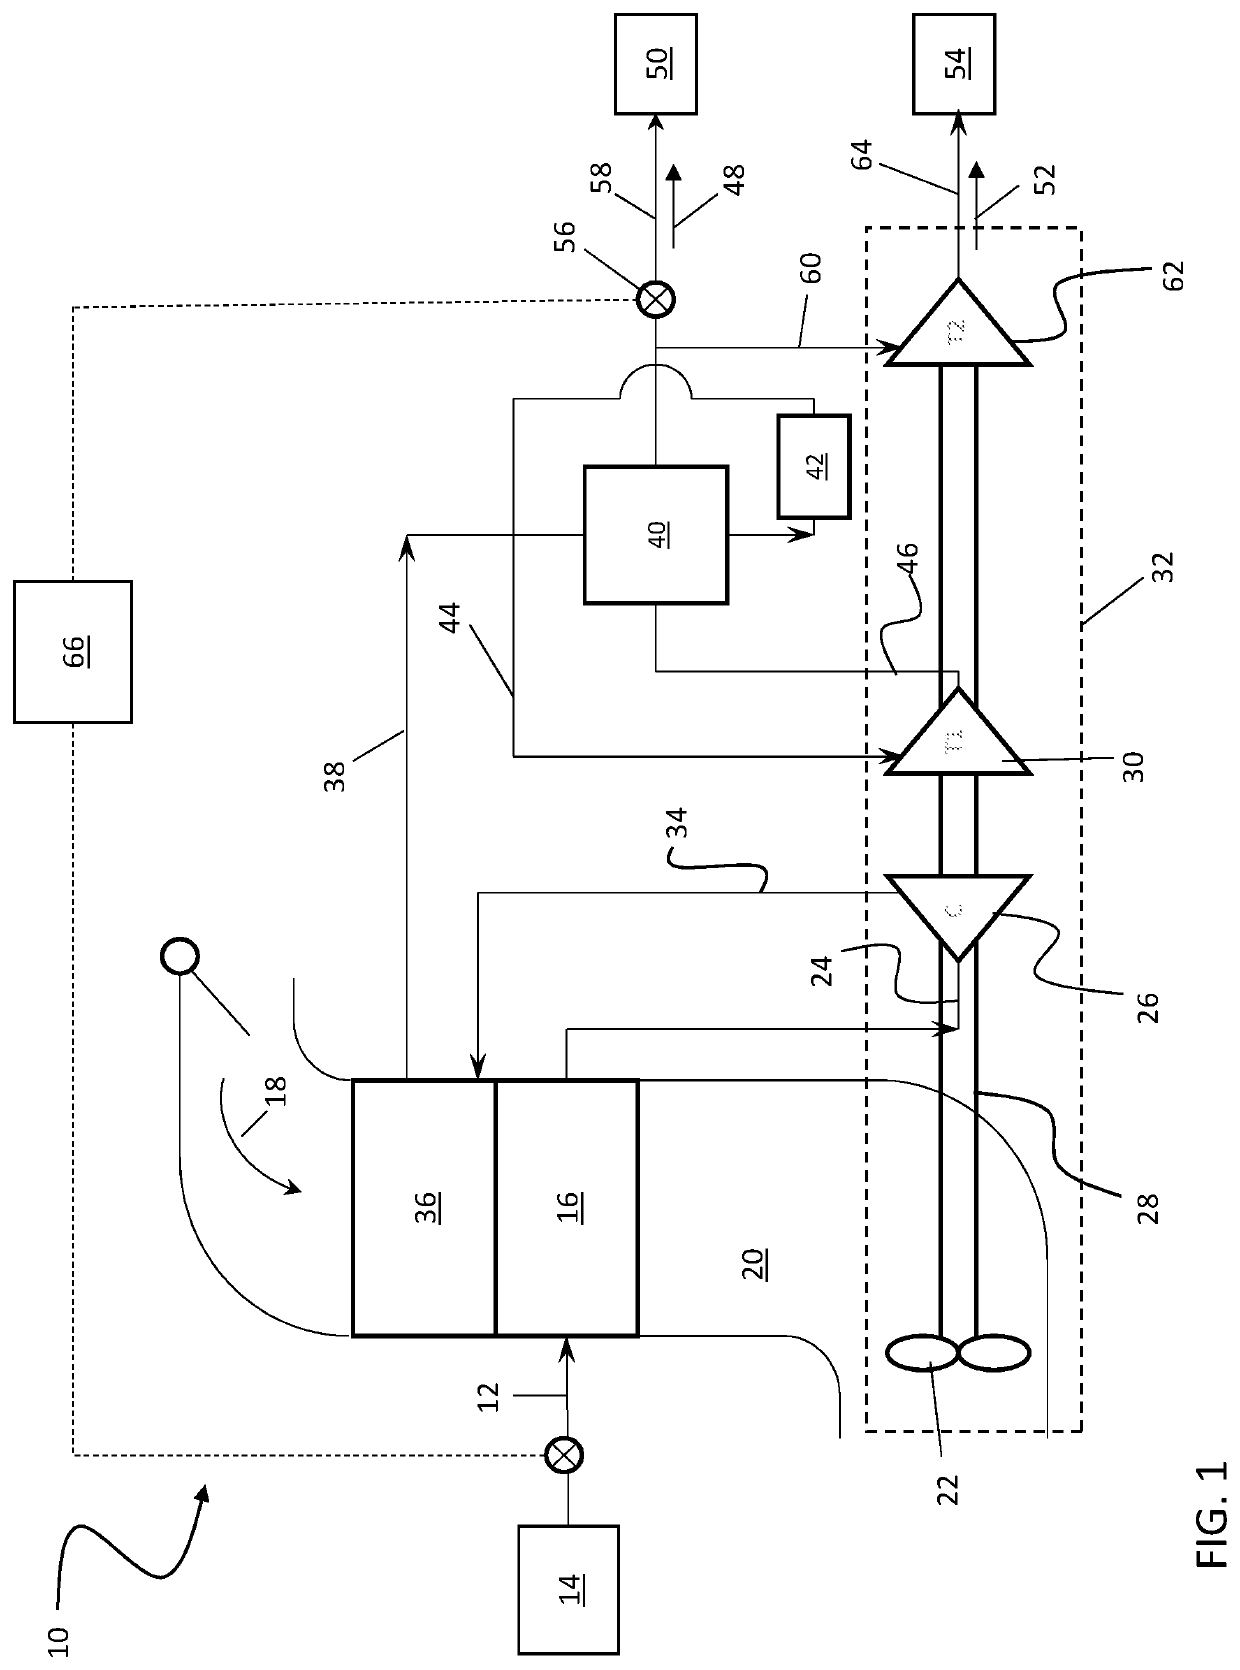 Pressure optimized sourcing of cabin pressurization and component air cooling